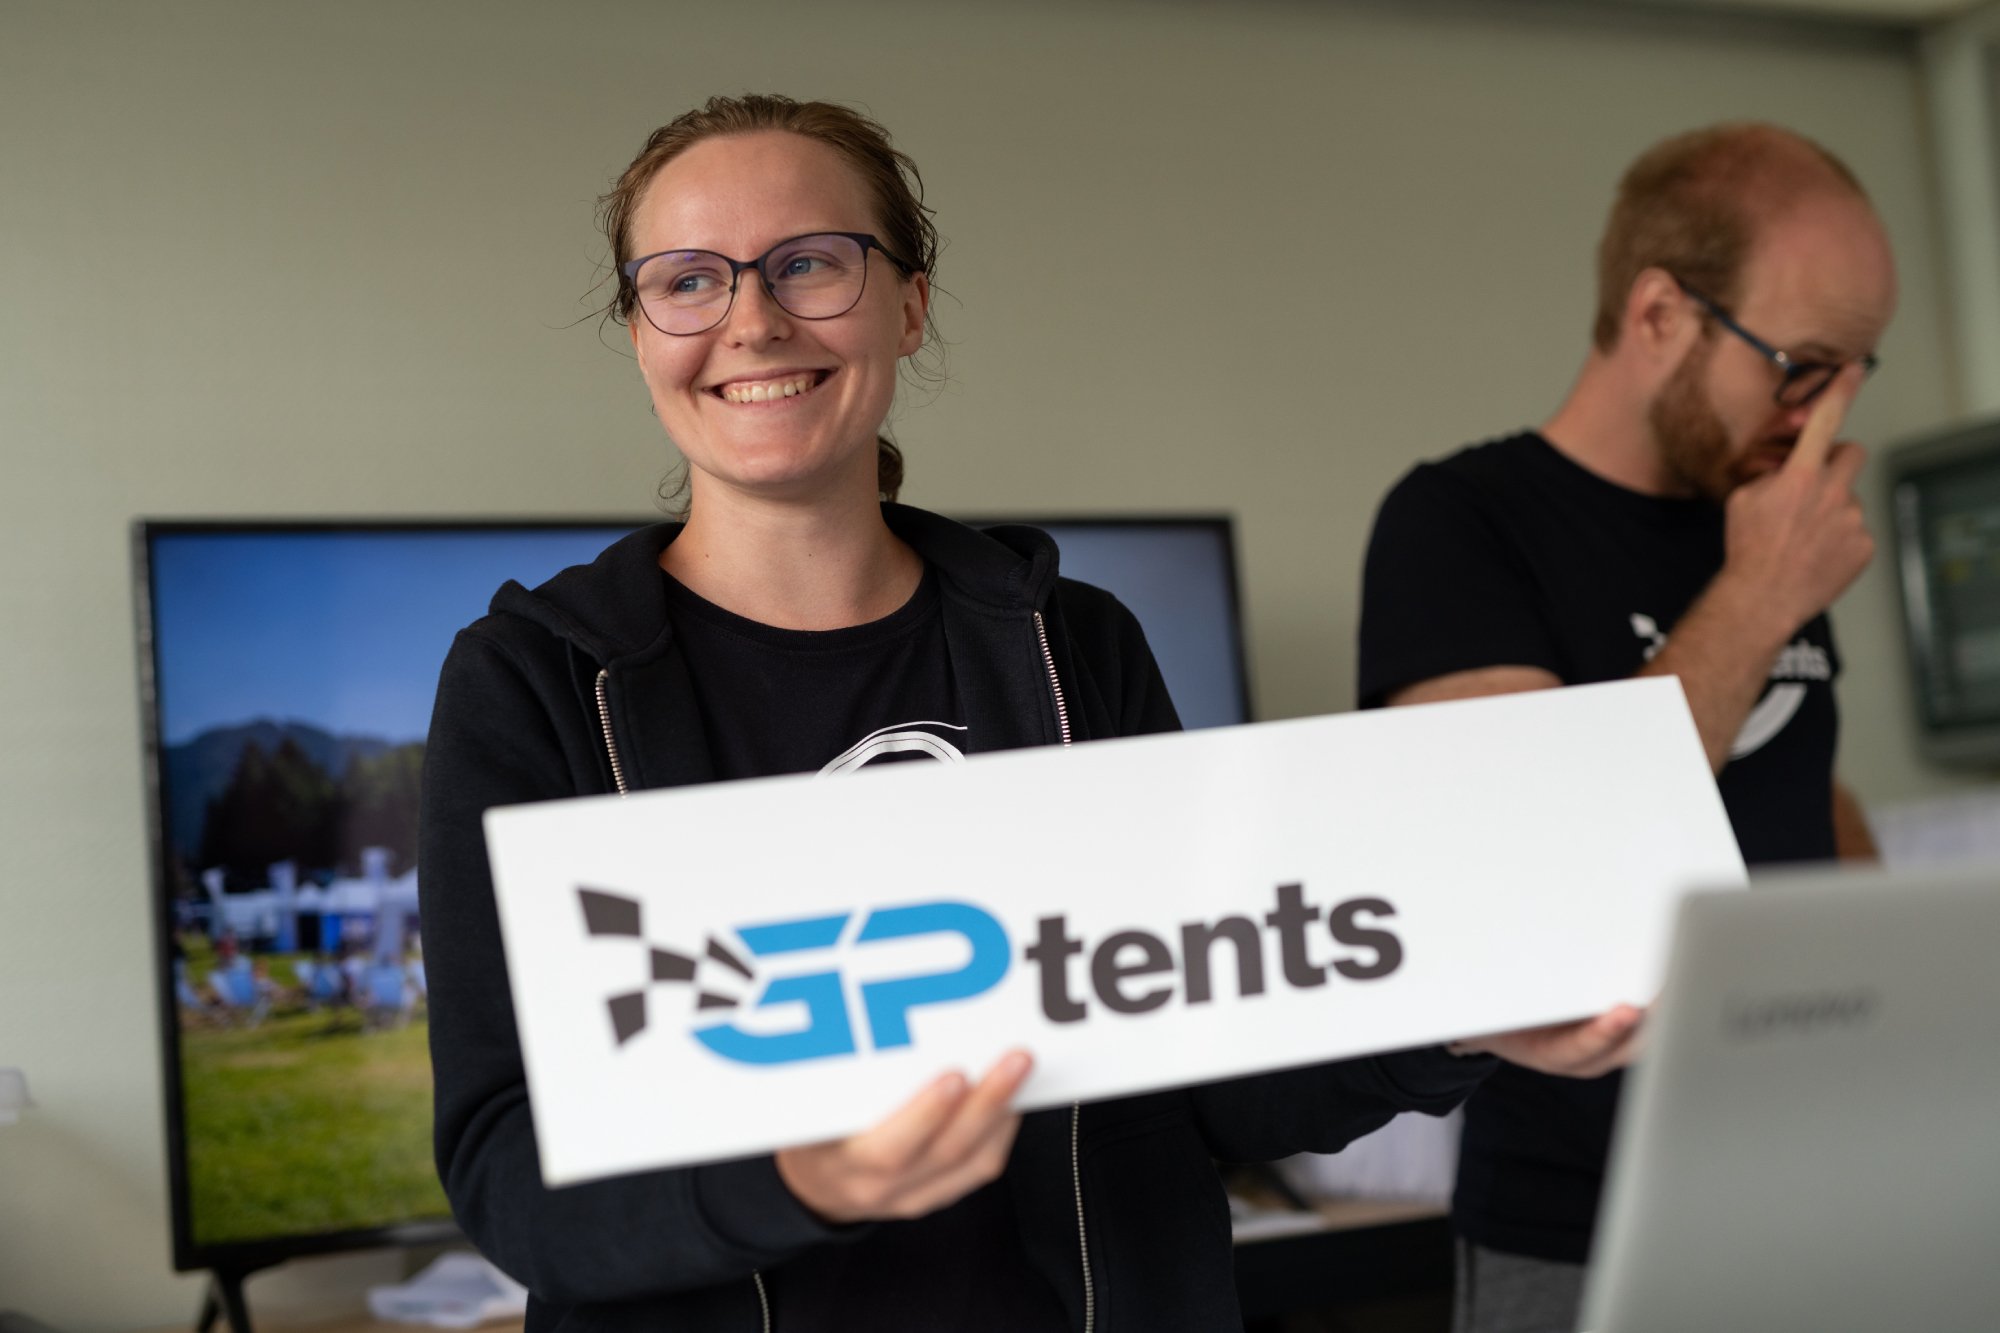 Are you looking for accommodation for your F1 or MotoGP event? Do you want to experience camping without giving up luxury? Then you should check out GPtents!